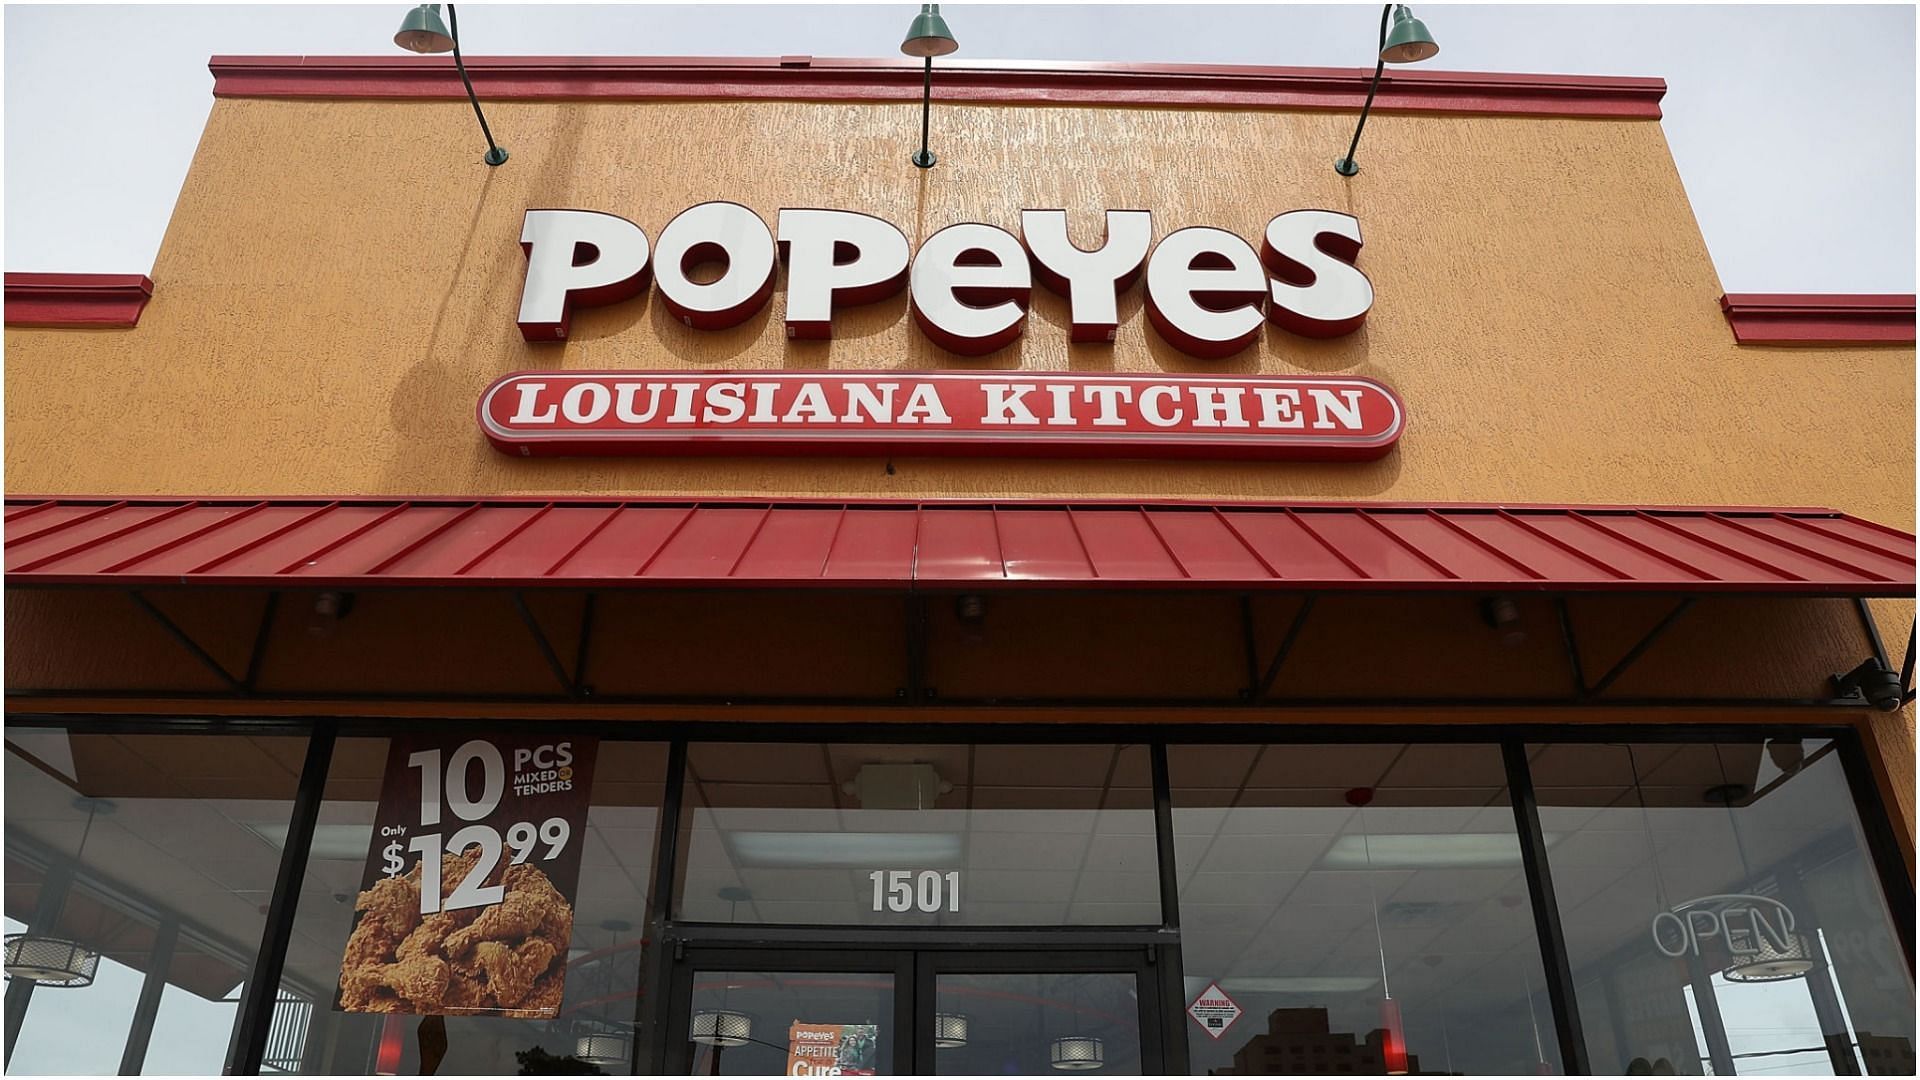 Popeyes food joint in Philadelphia has now banned homeless people from entering inside (Image by Joe Raedle via Getty Images)